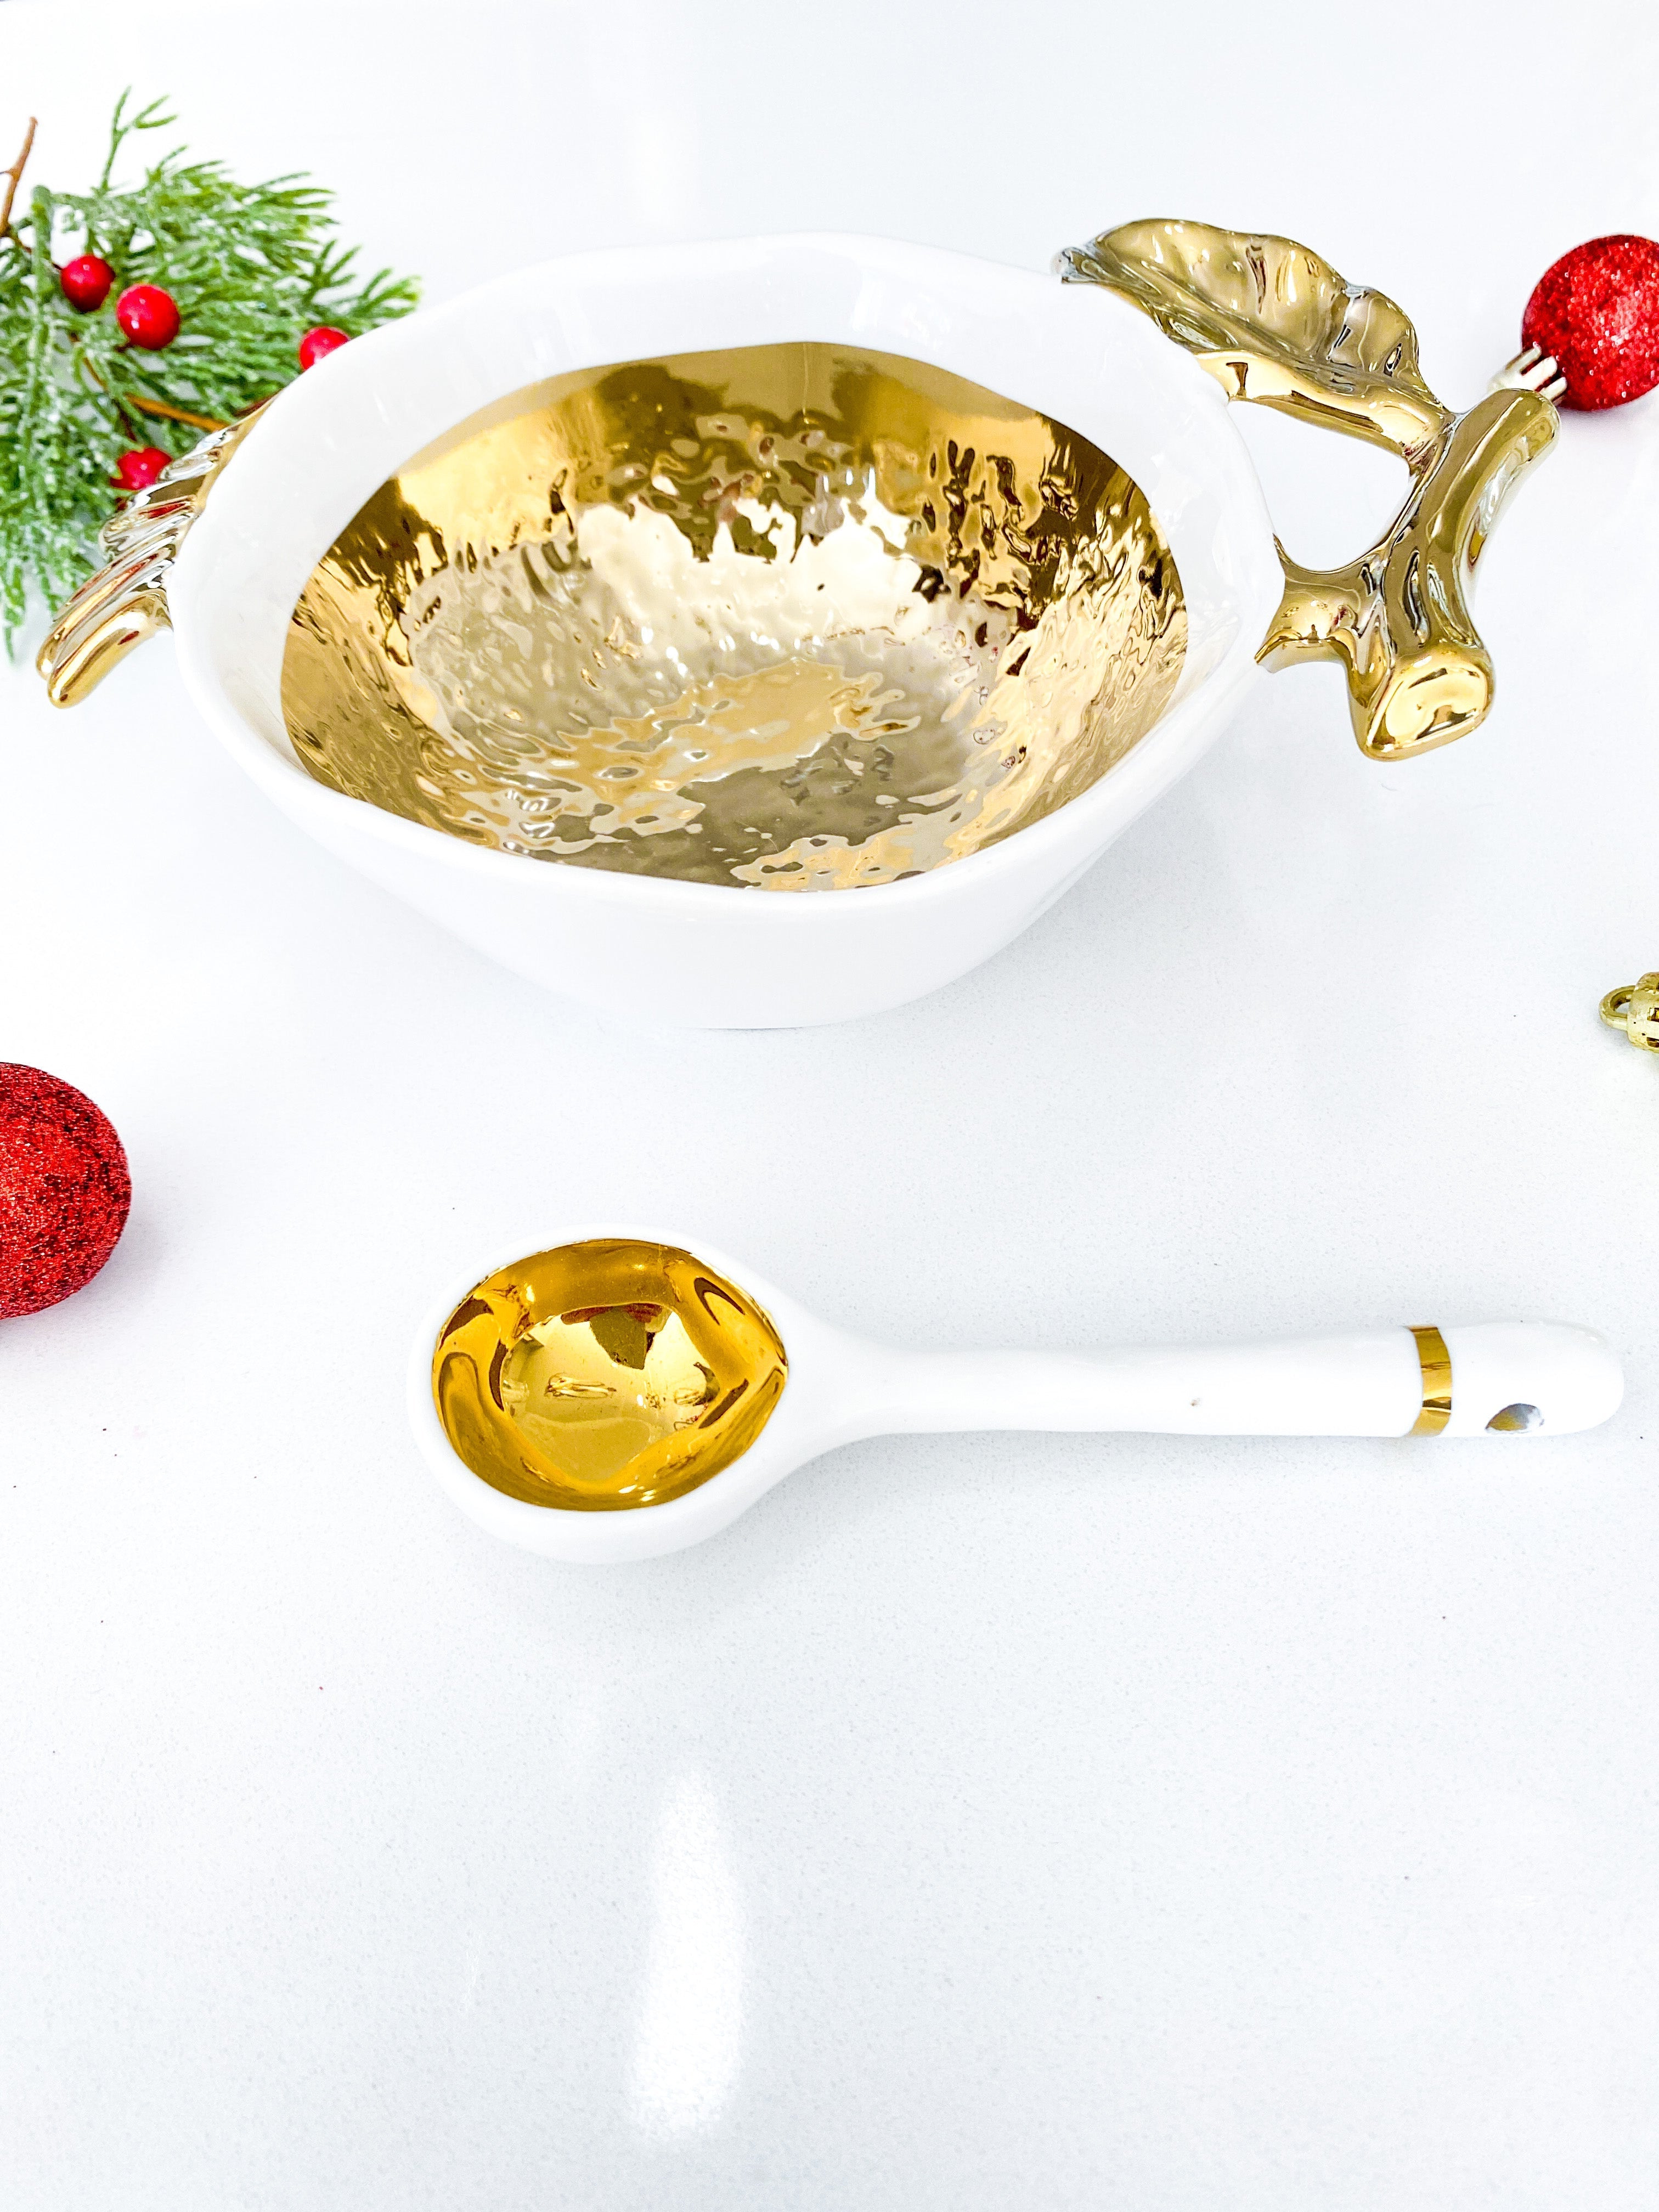 Gold Pomegranate Bowl Set with Spoon - HTS HOME DECOR